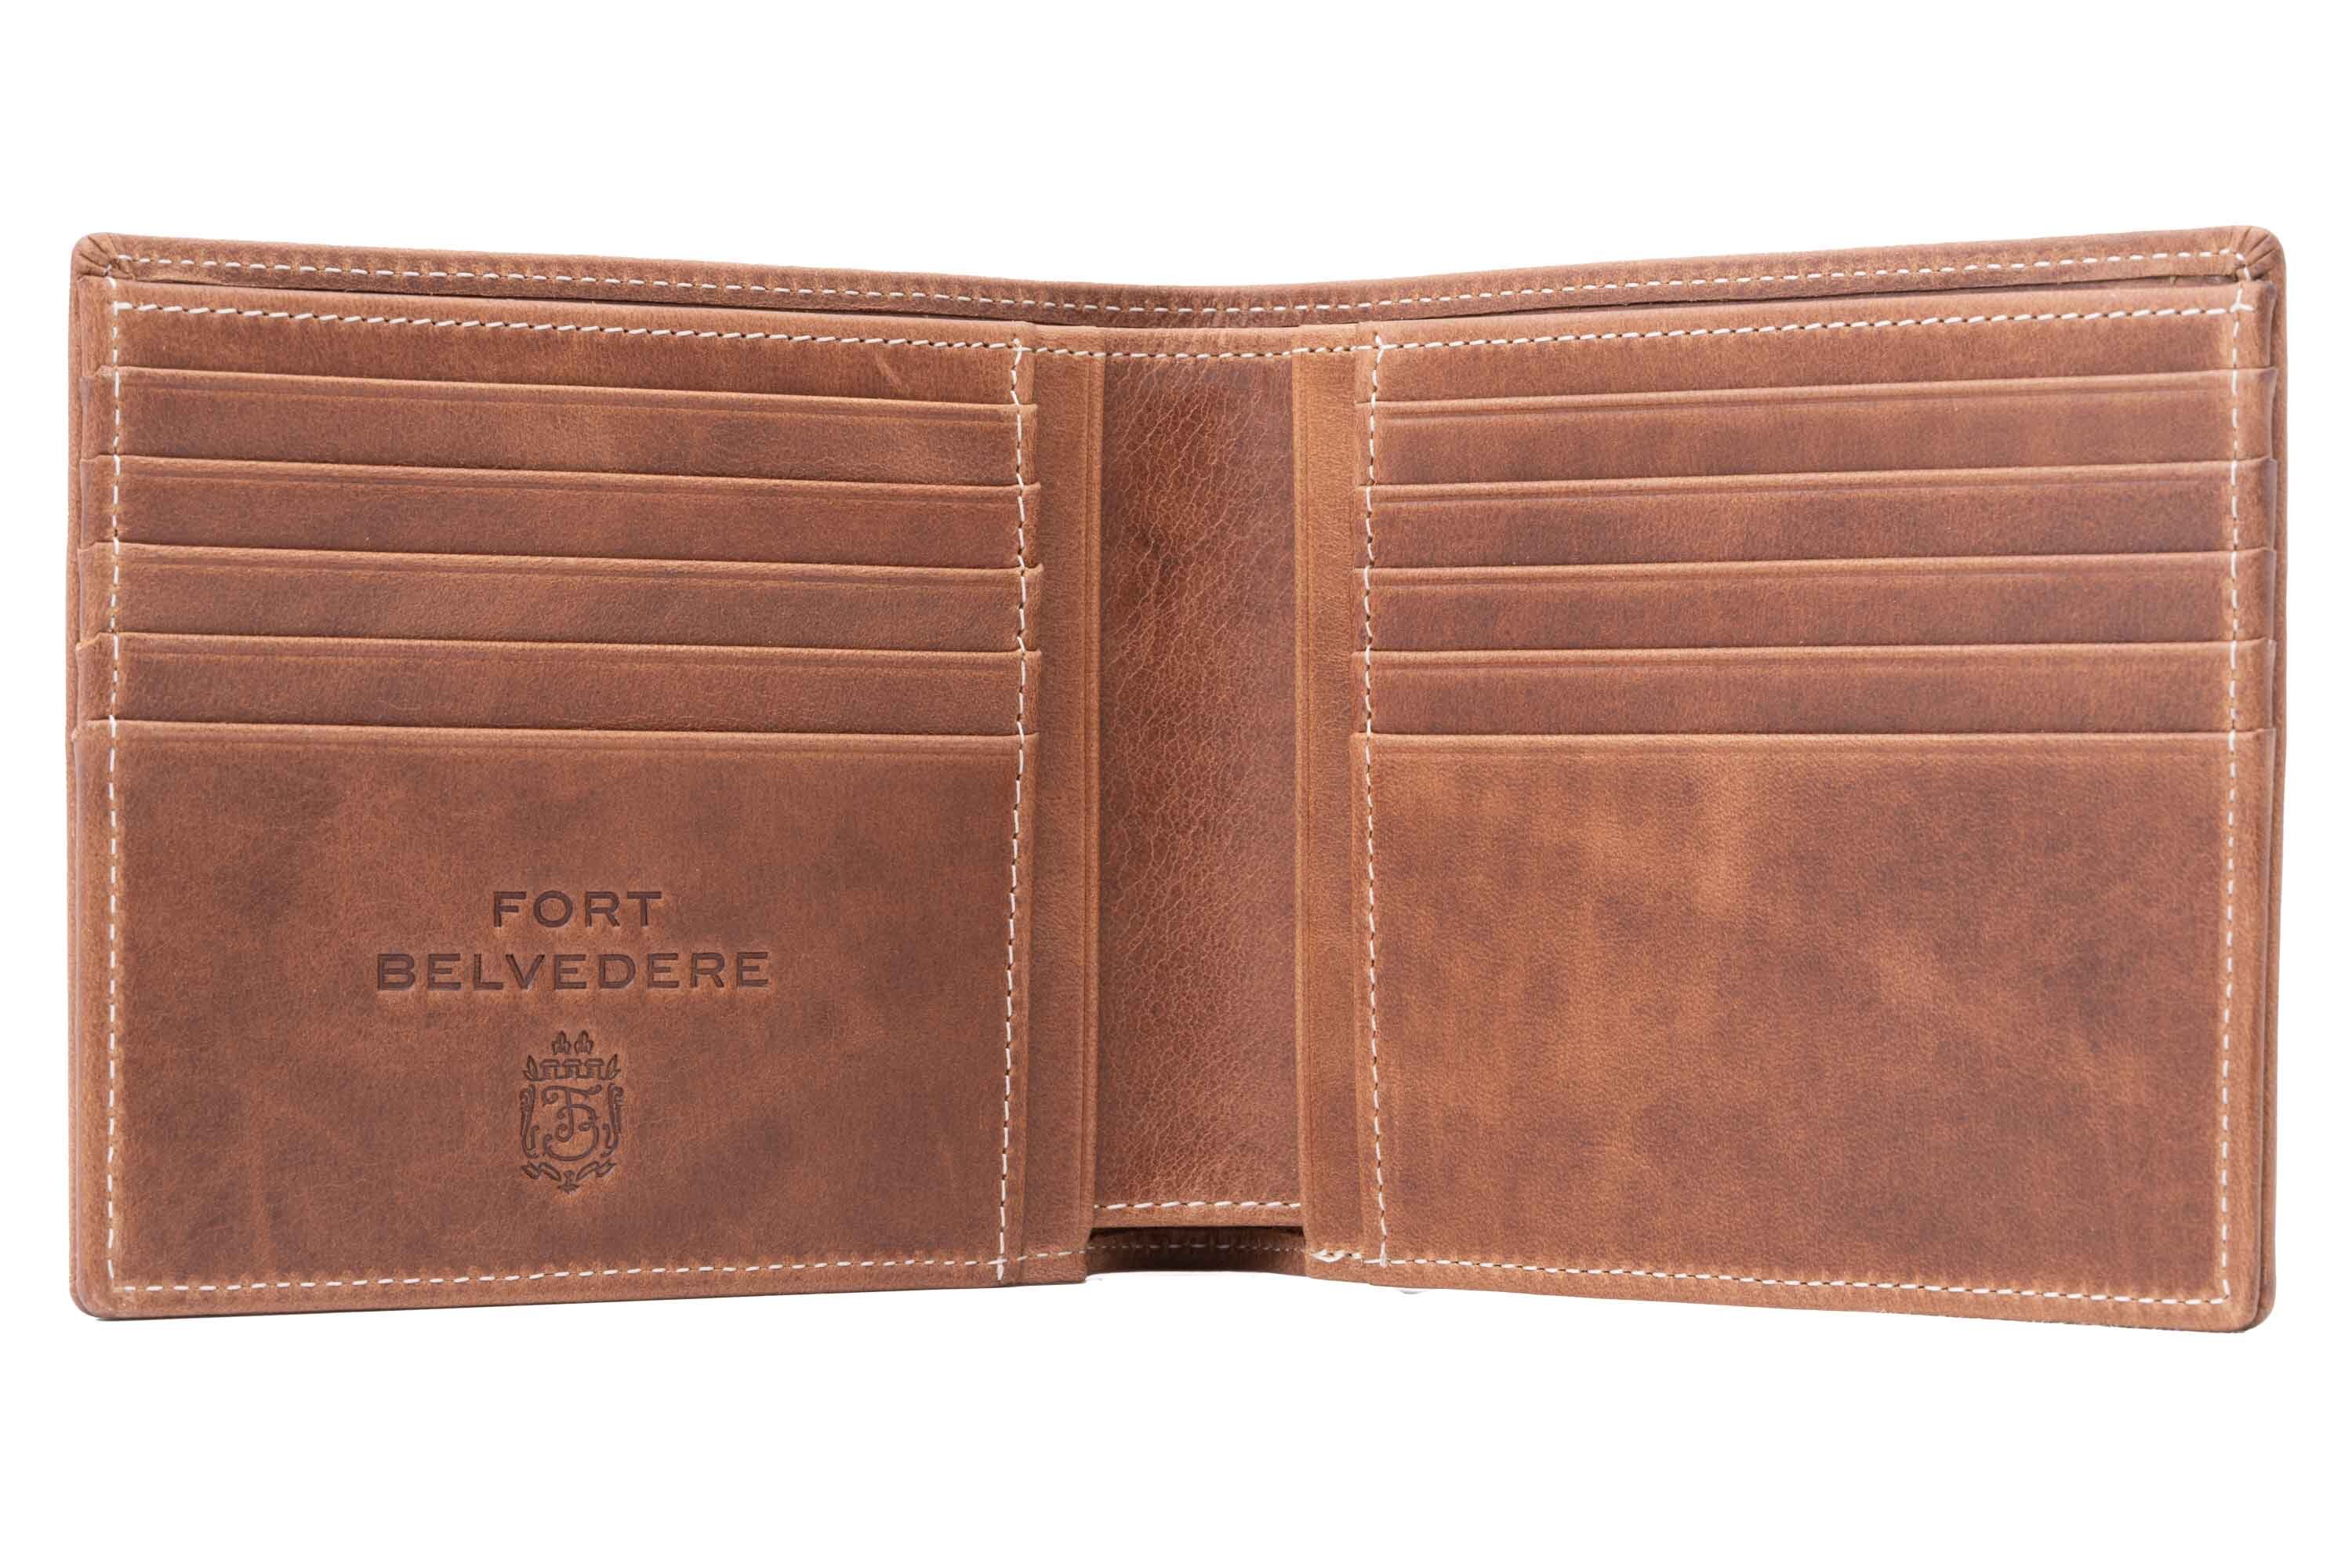 Saddle Brown Bifold Wallet in Full-Grain Montecristo Leather 8 card slots